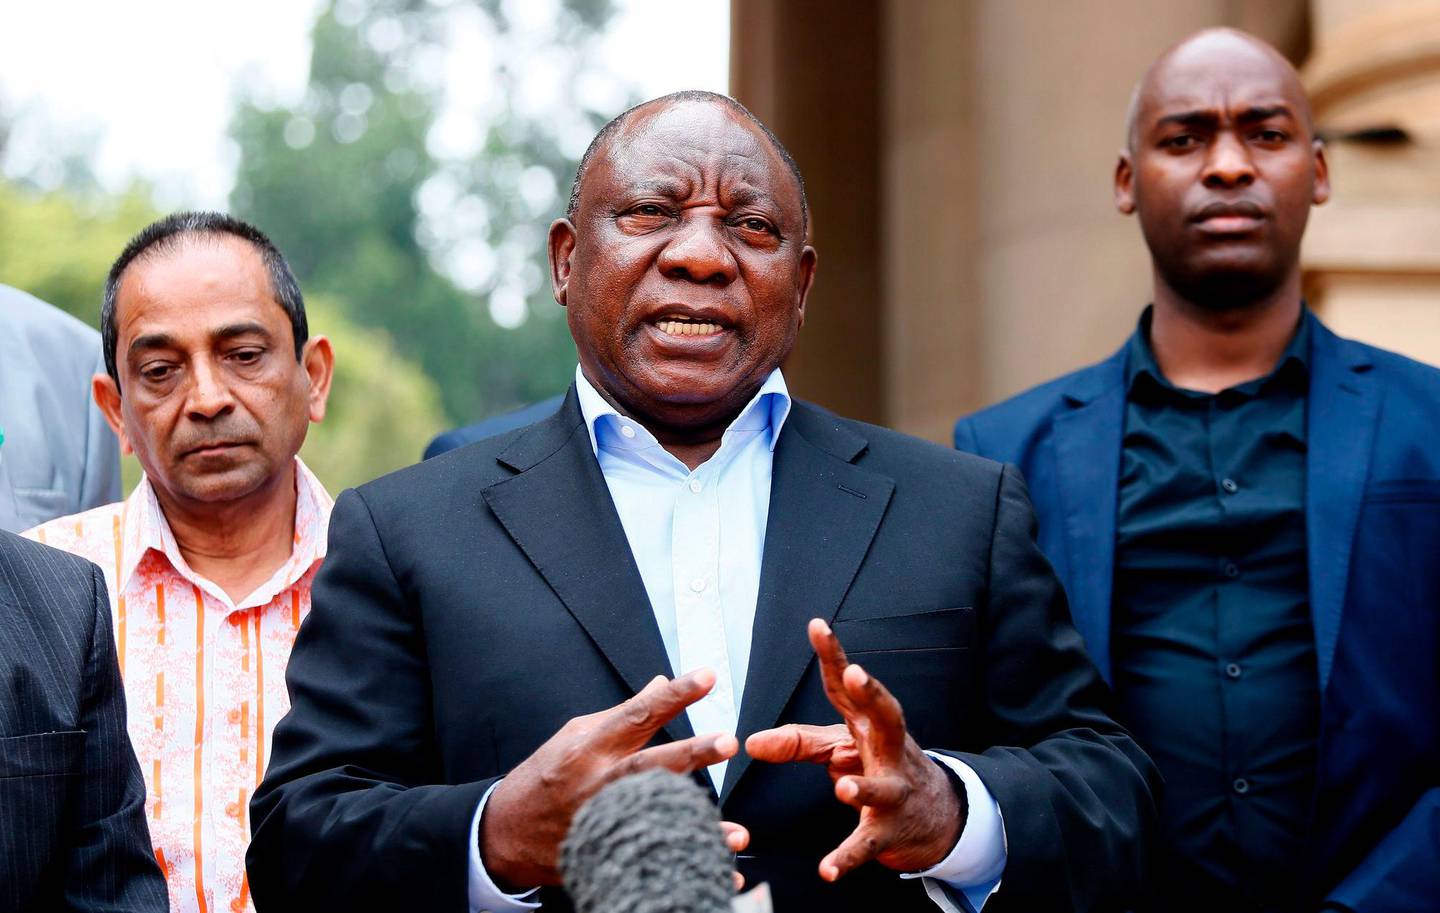 South African President Cyril Ramaphosa (C) conducts a media briefing at the end of a meeting with various business leaders and political party leaders on matters relating to the COVID-19 outbreak at the Union Buildings in Pretoria on March 22, 2020. (Photo by Phill Magakoe / AFP)